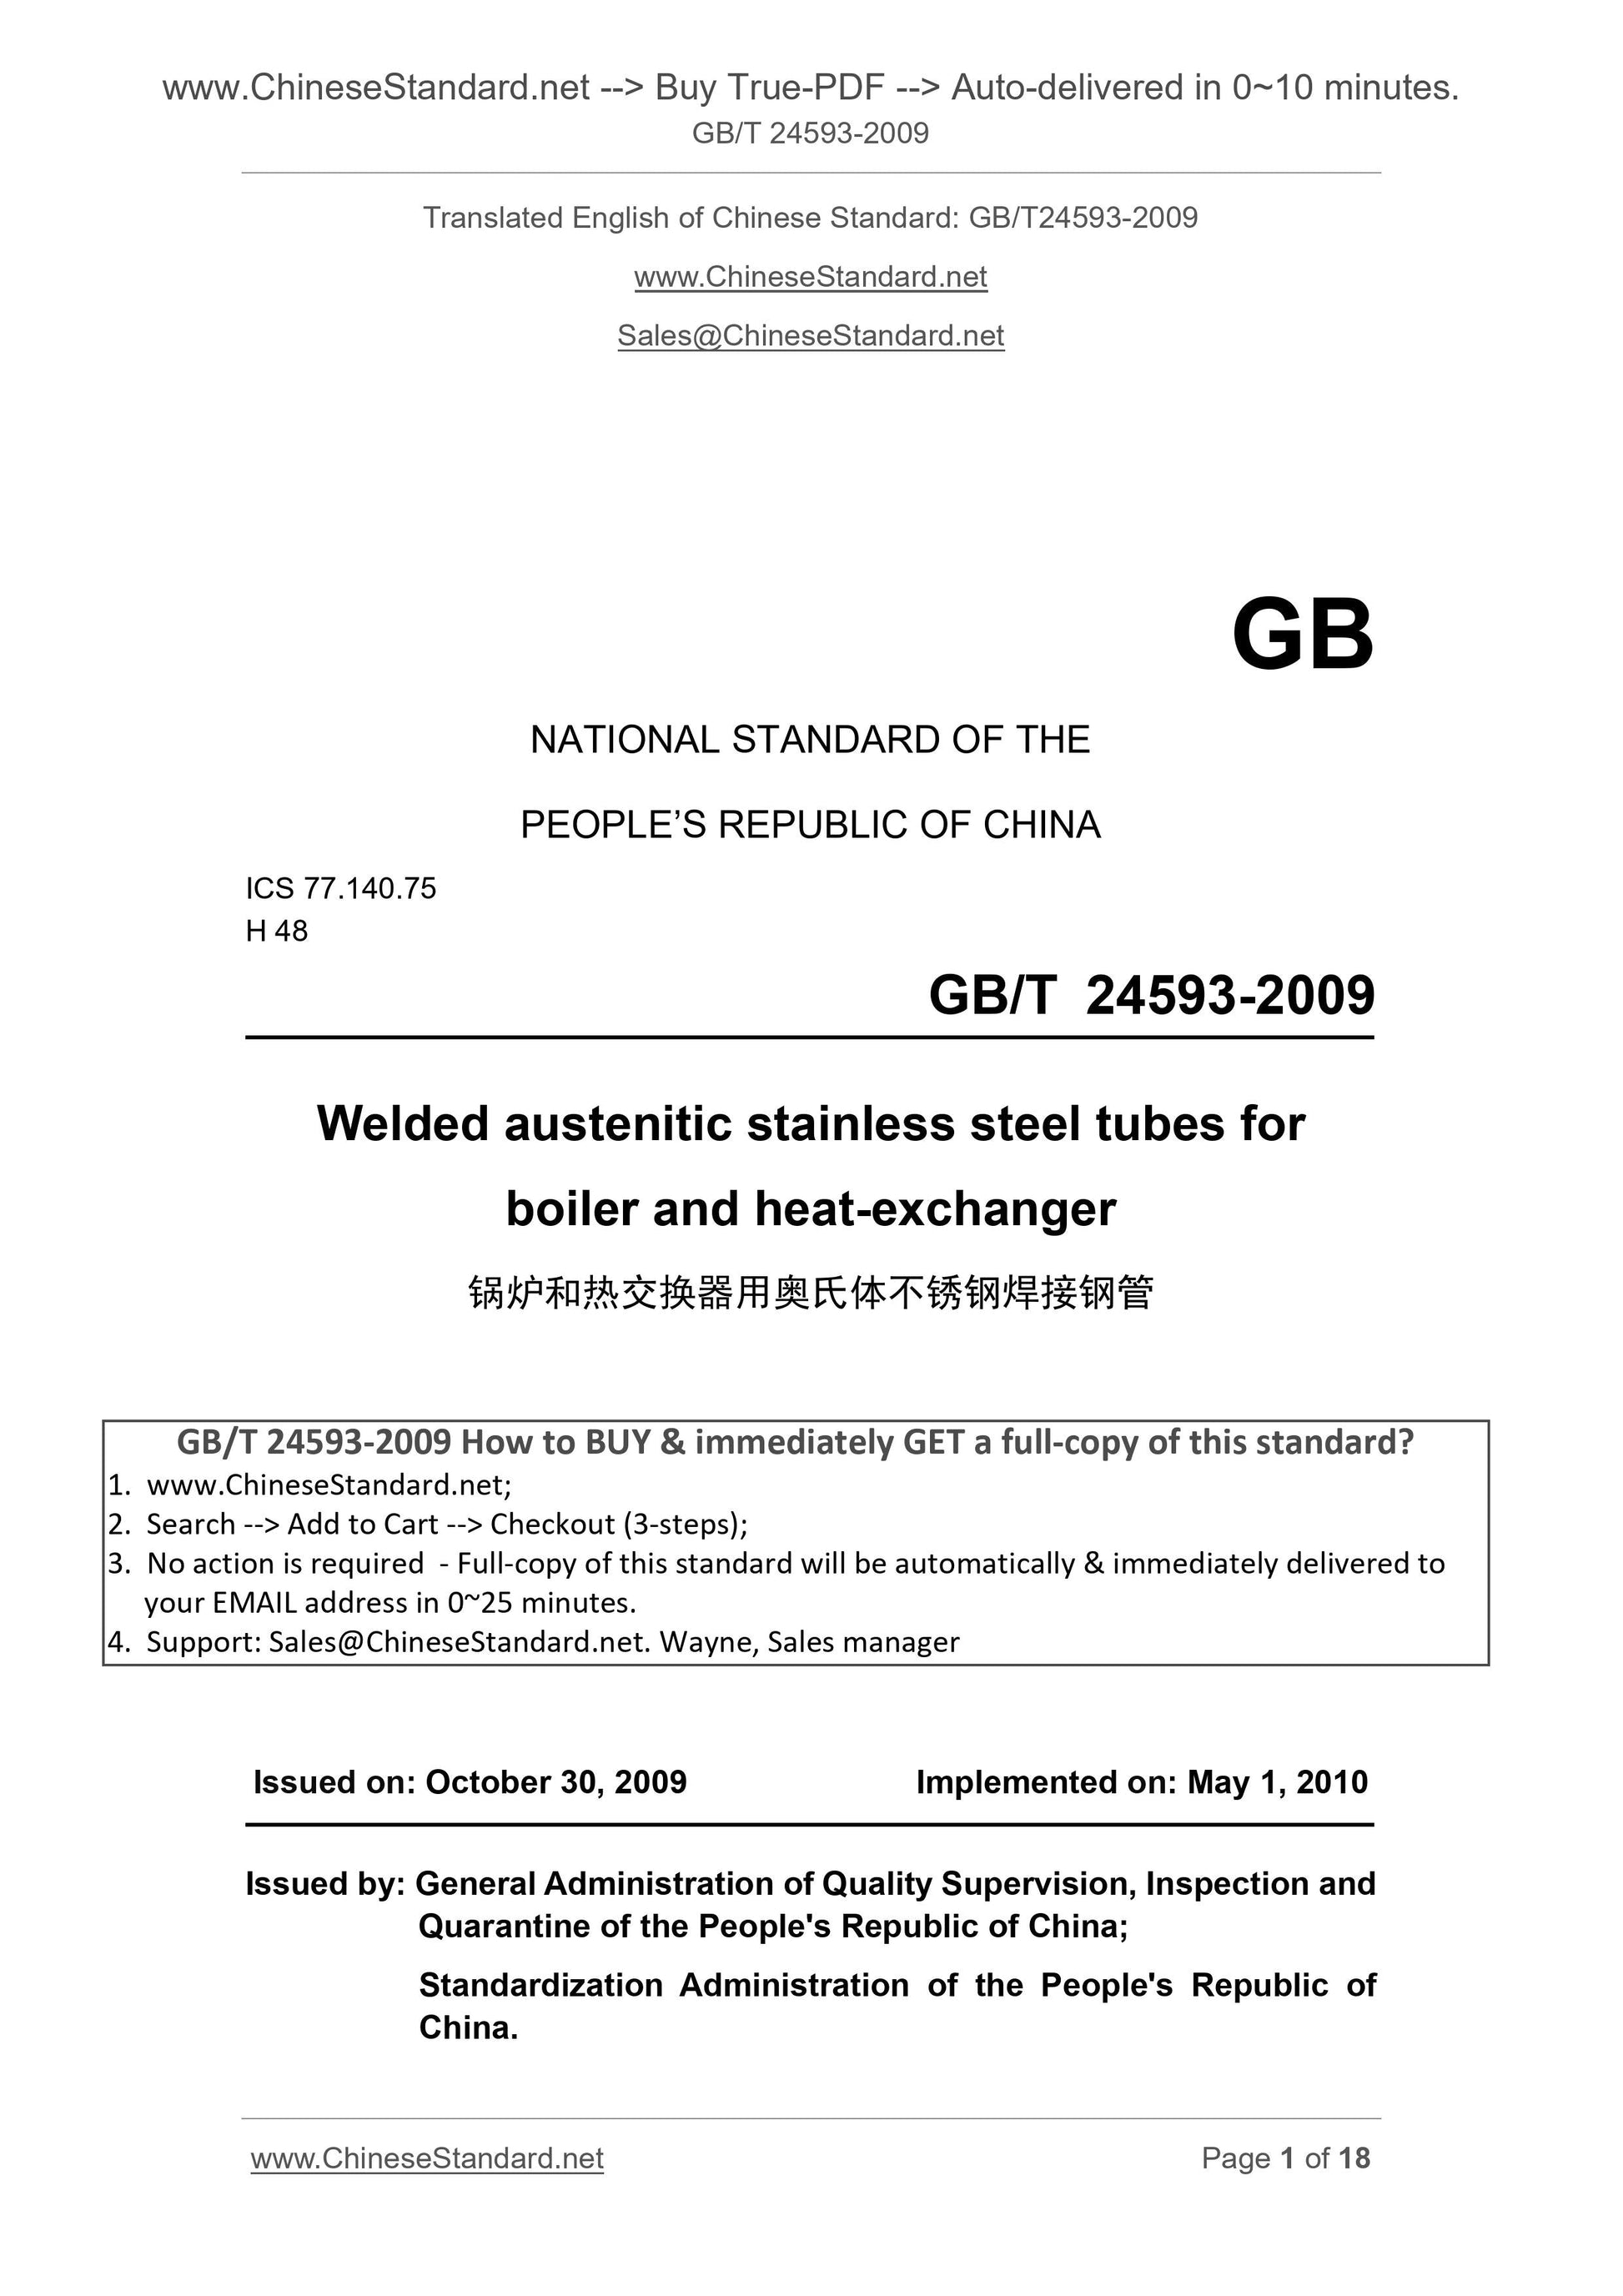 GB/T 24593-2009 Page 1